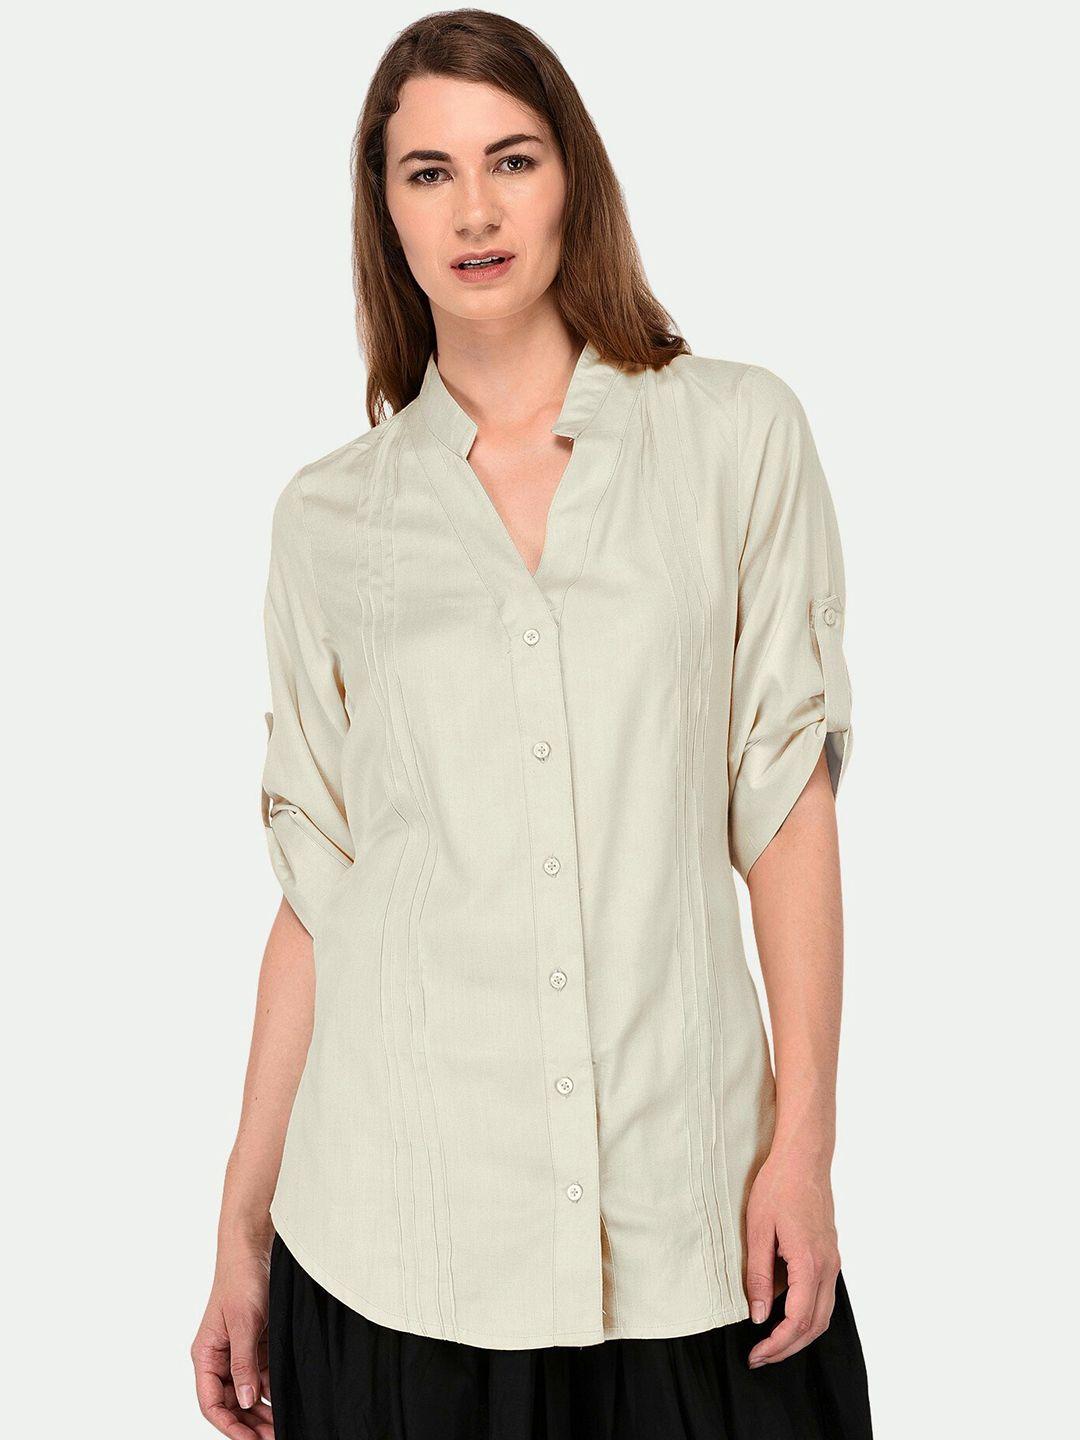 patrorna women off white comfort casual antimicrobial shirt